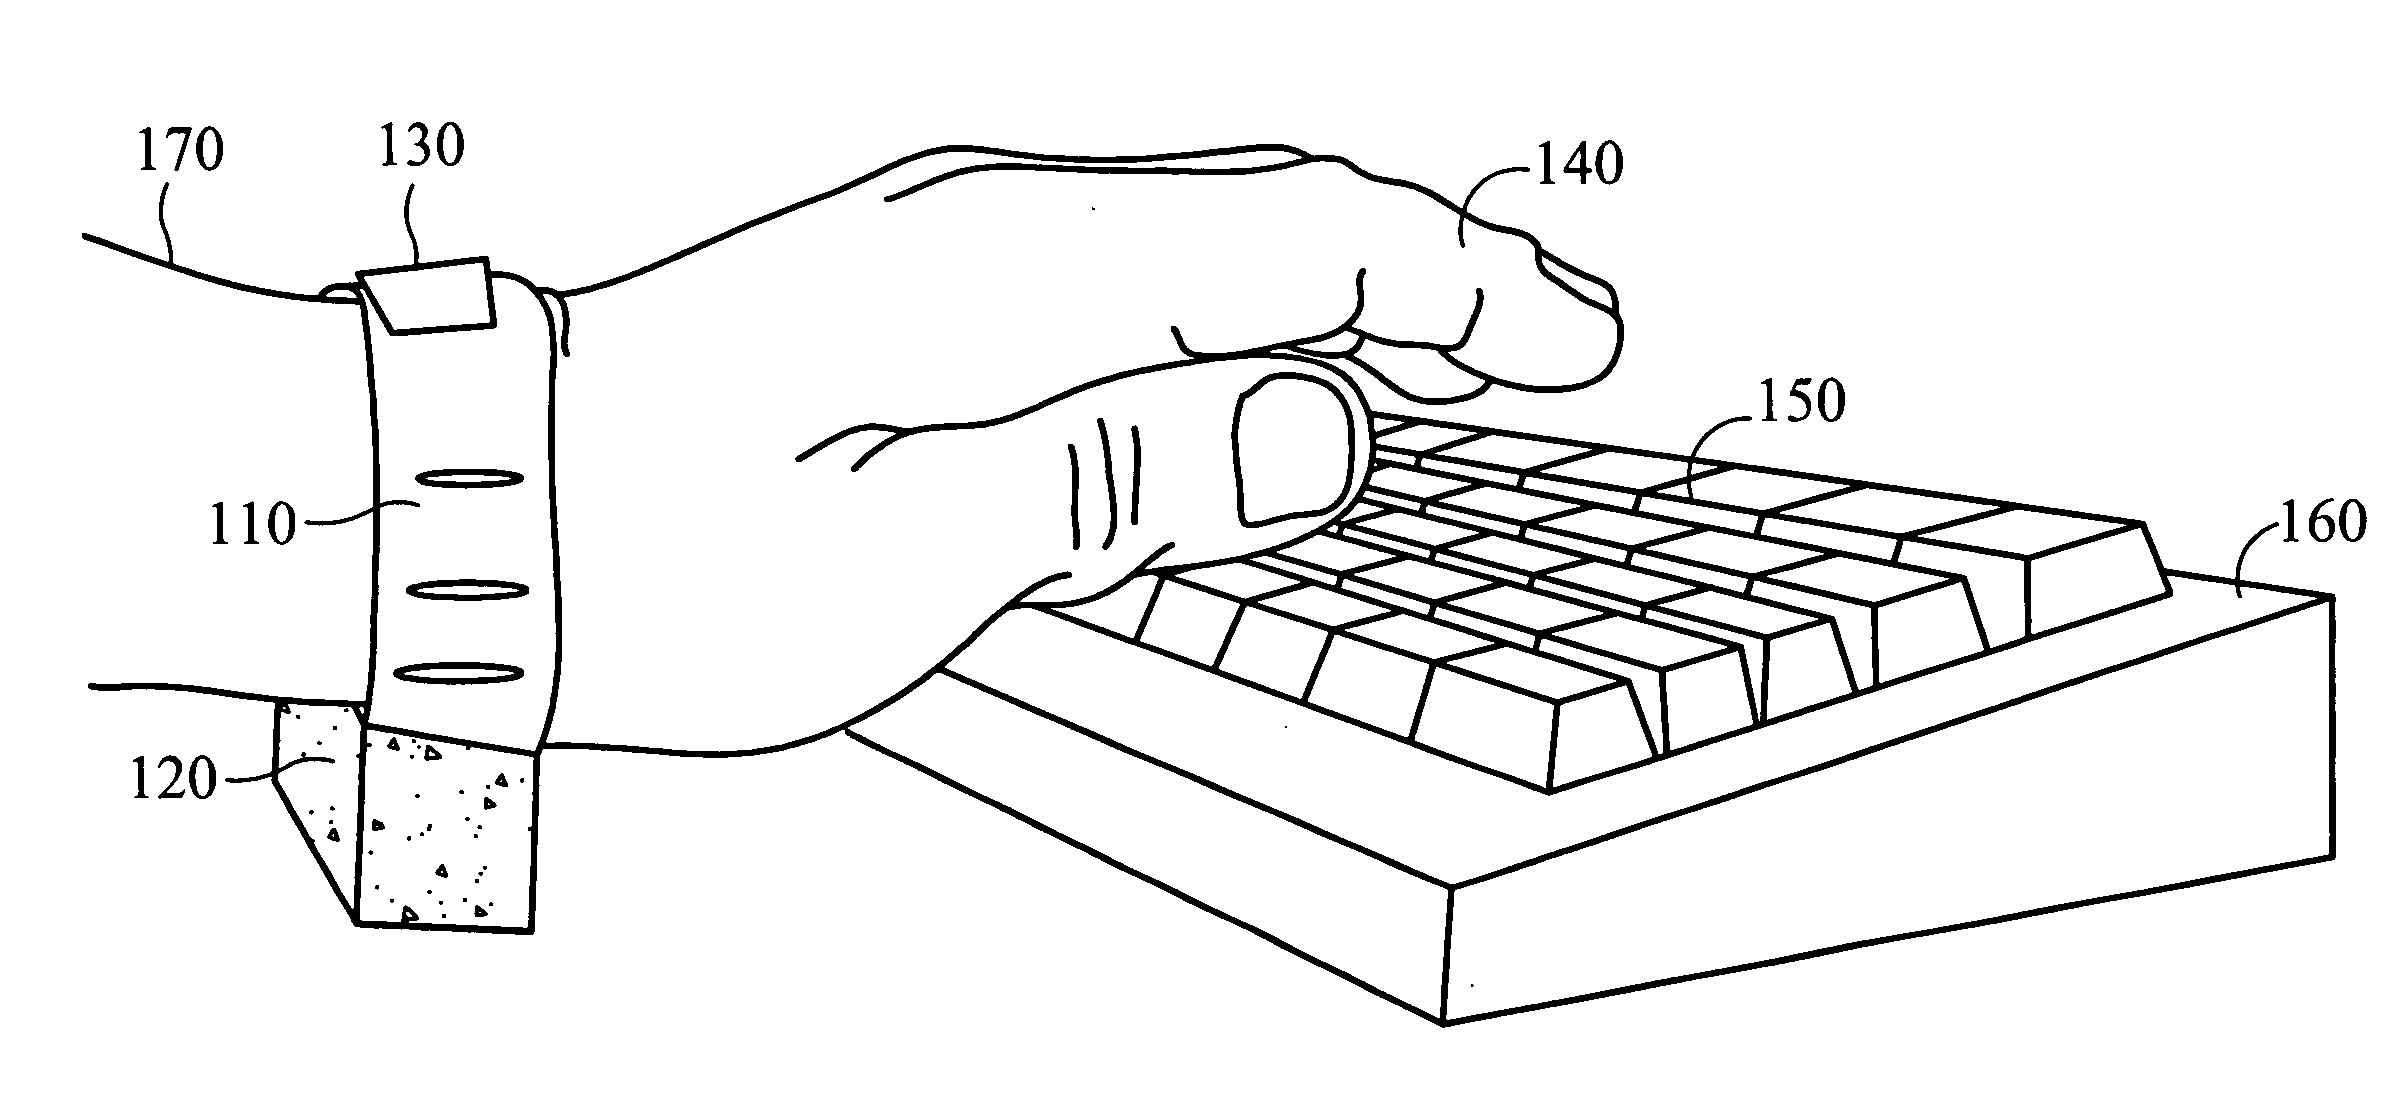 Wristband for keyboard and mouse use